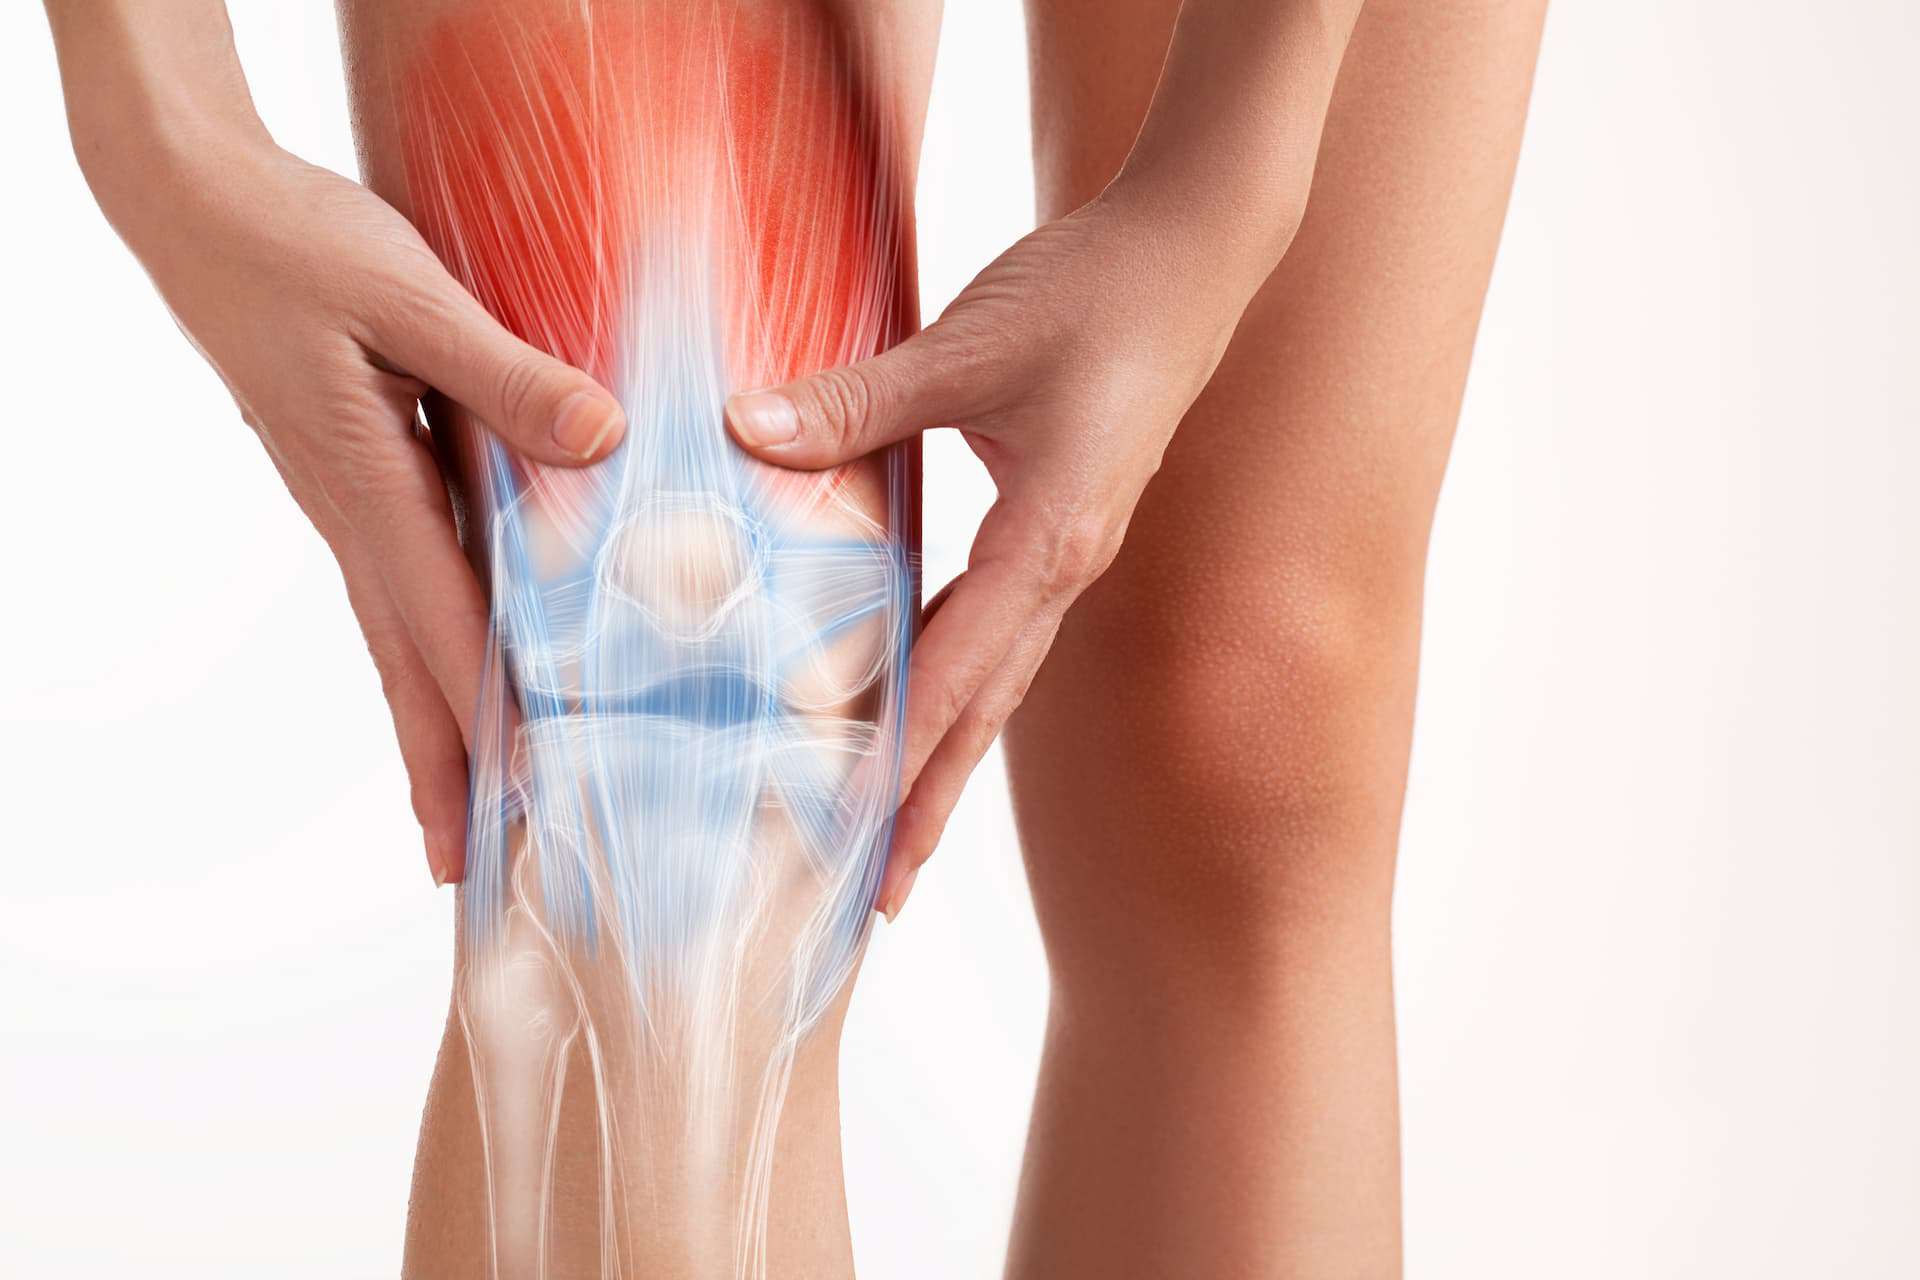 A close-up of a knee being gripped due to pain, with a digital overlay highlighting the bones and muscles.